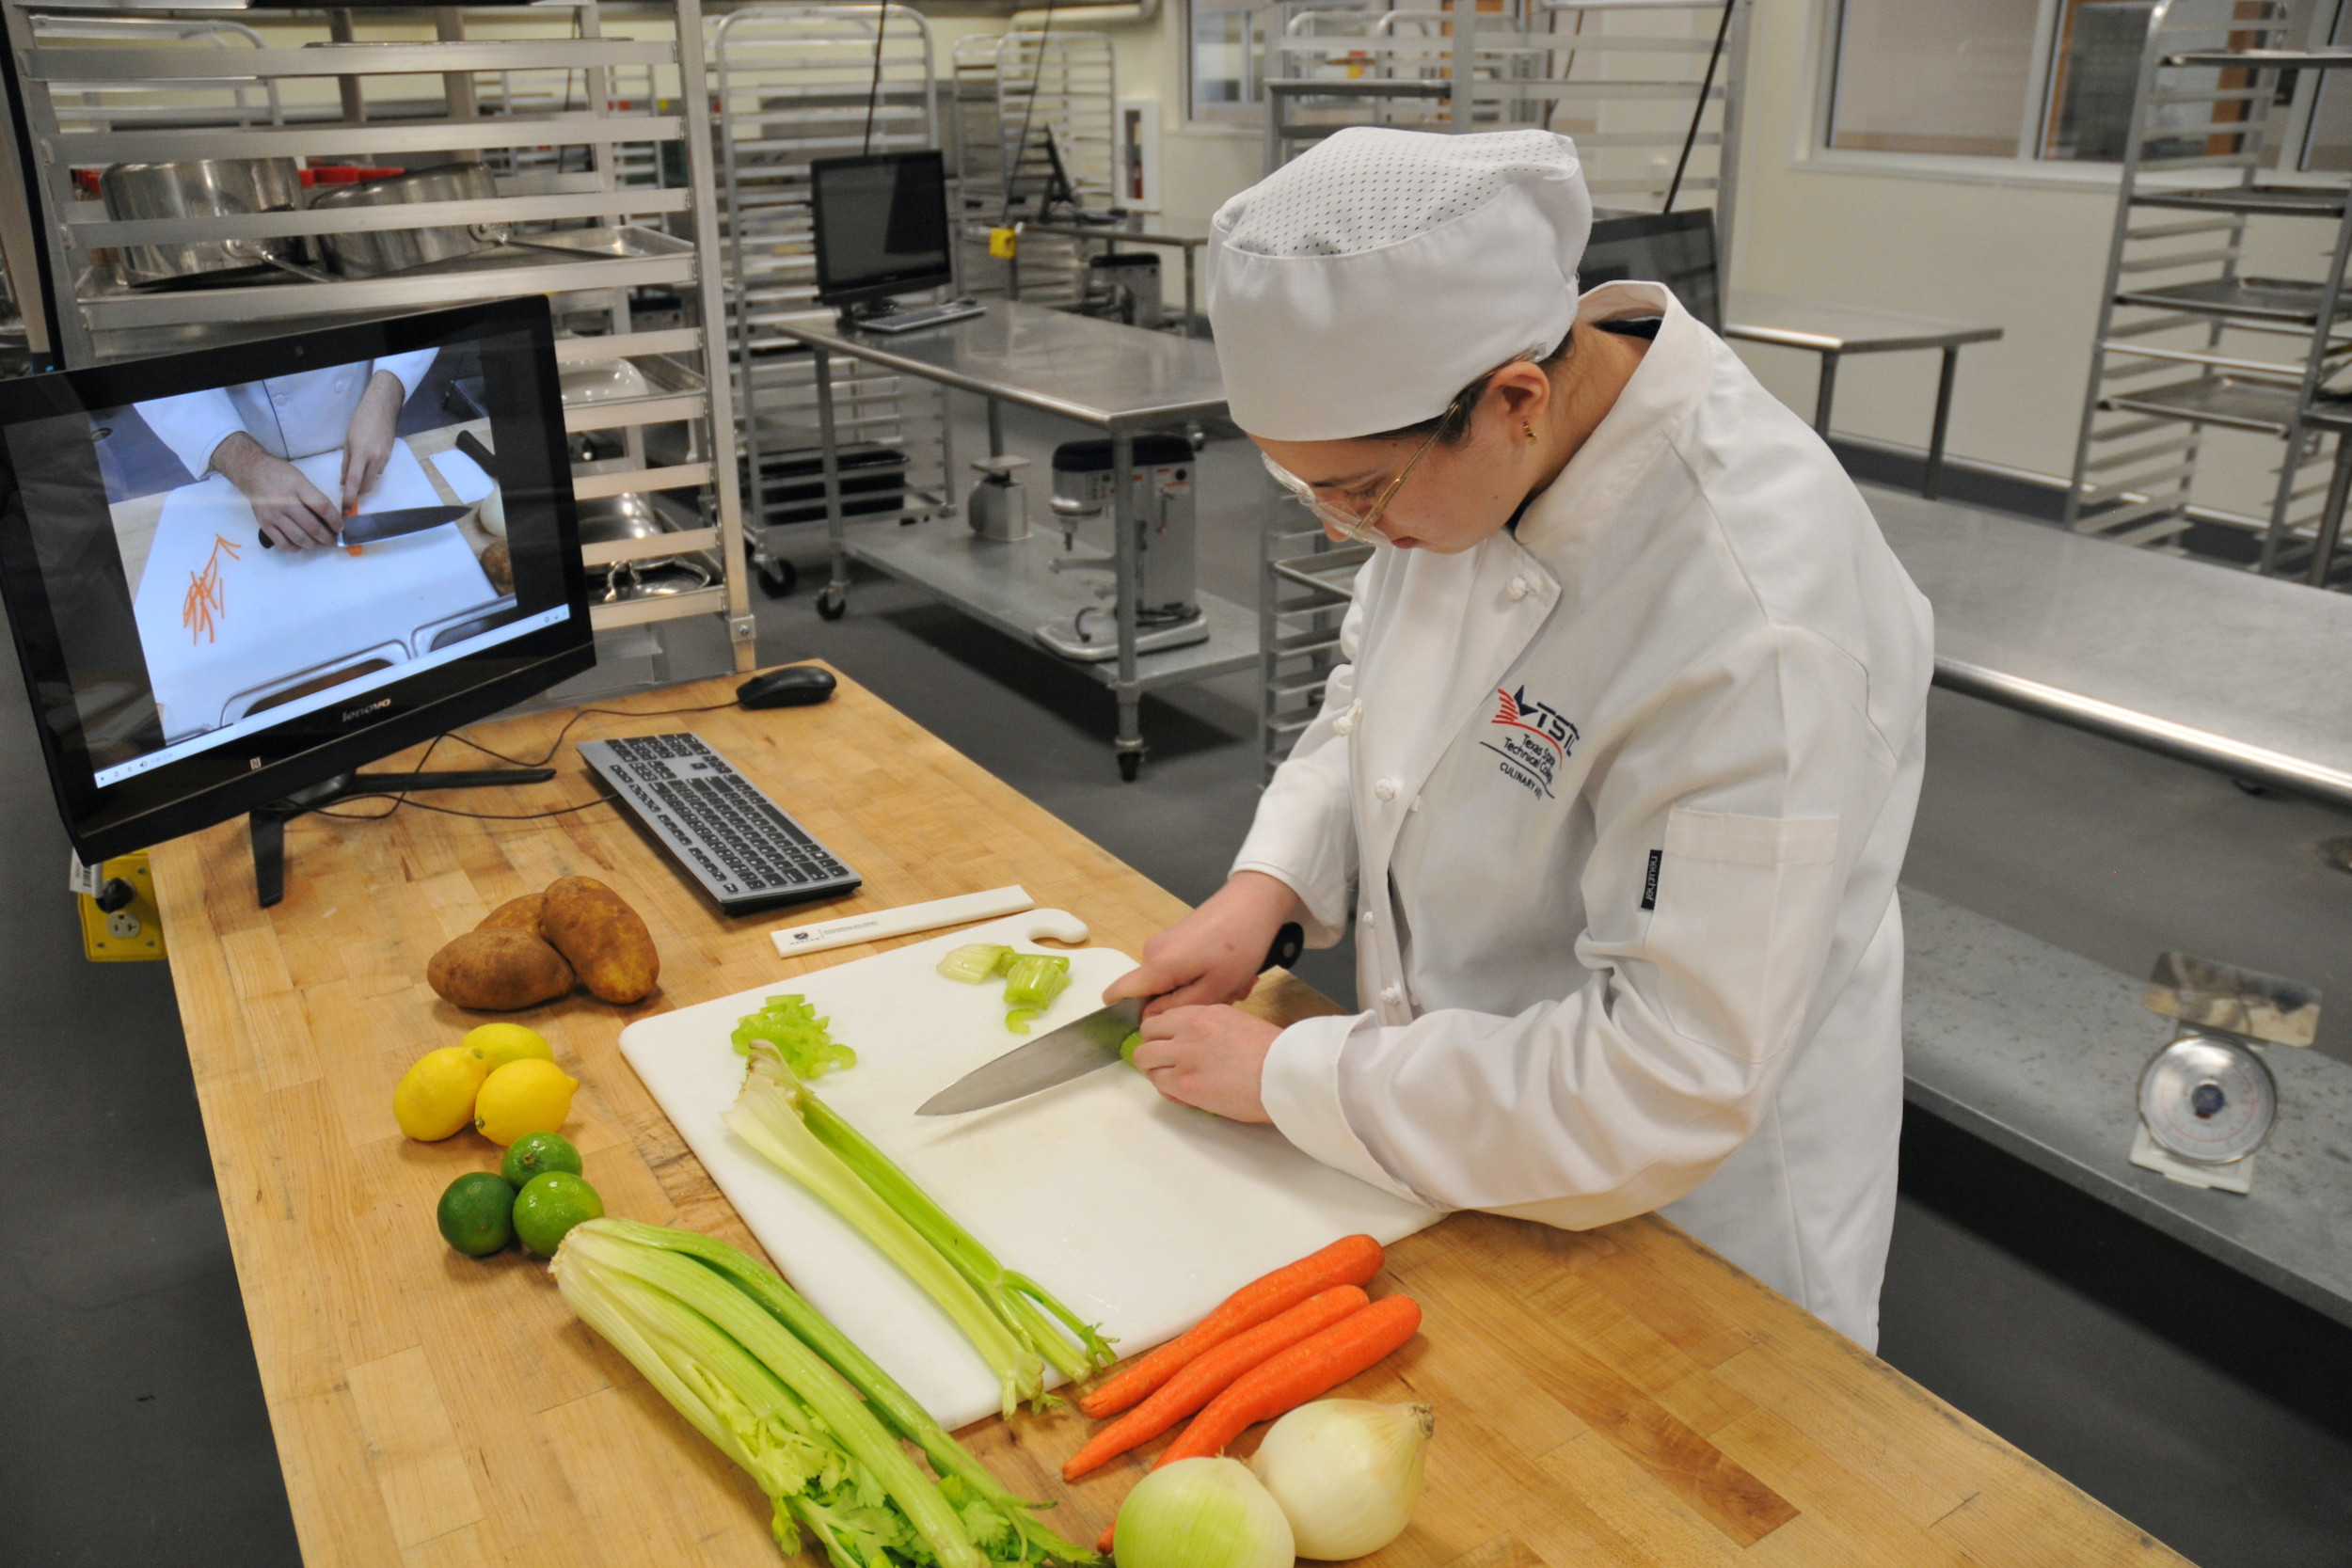 tstc culinary student following instructional video on vegetable cutting